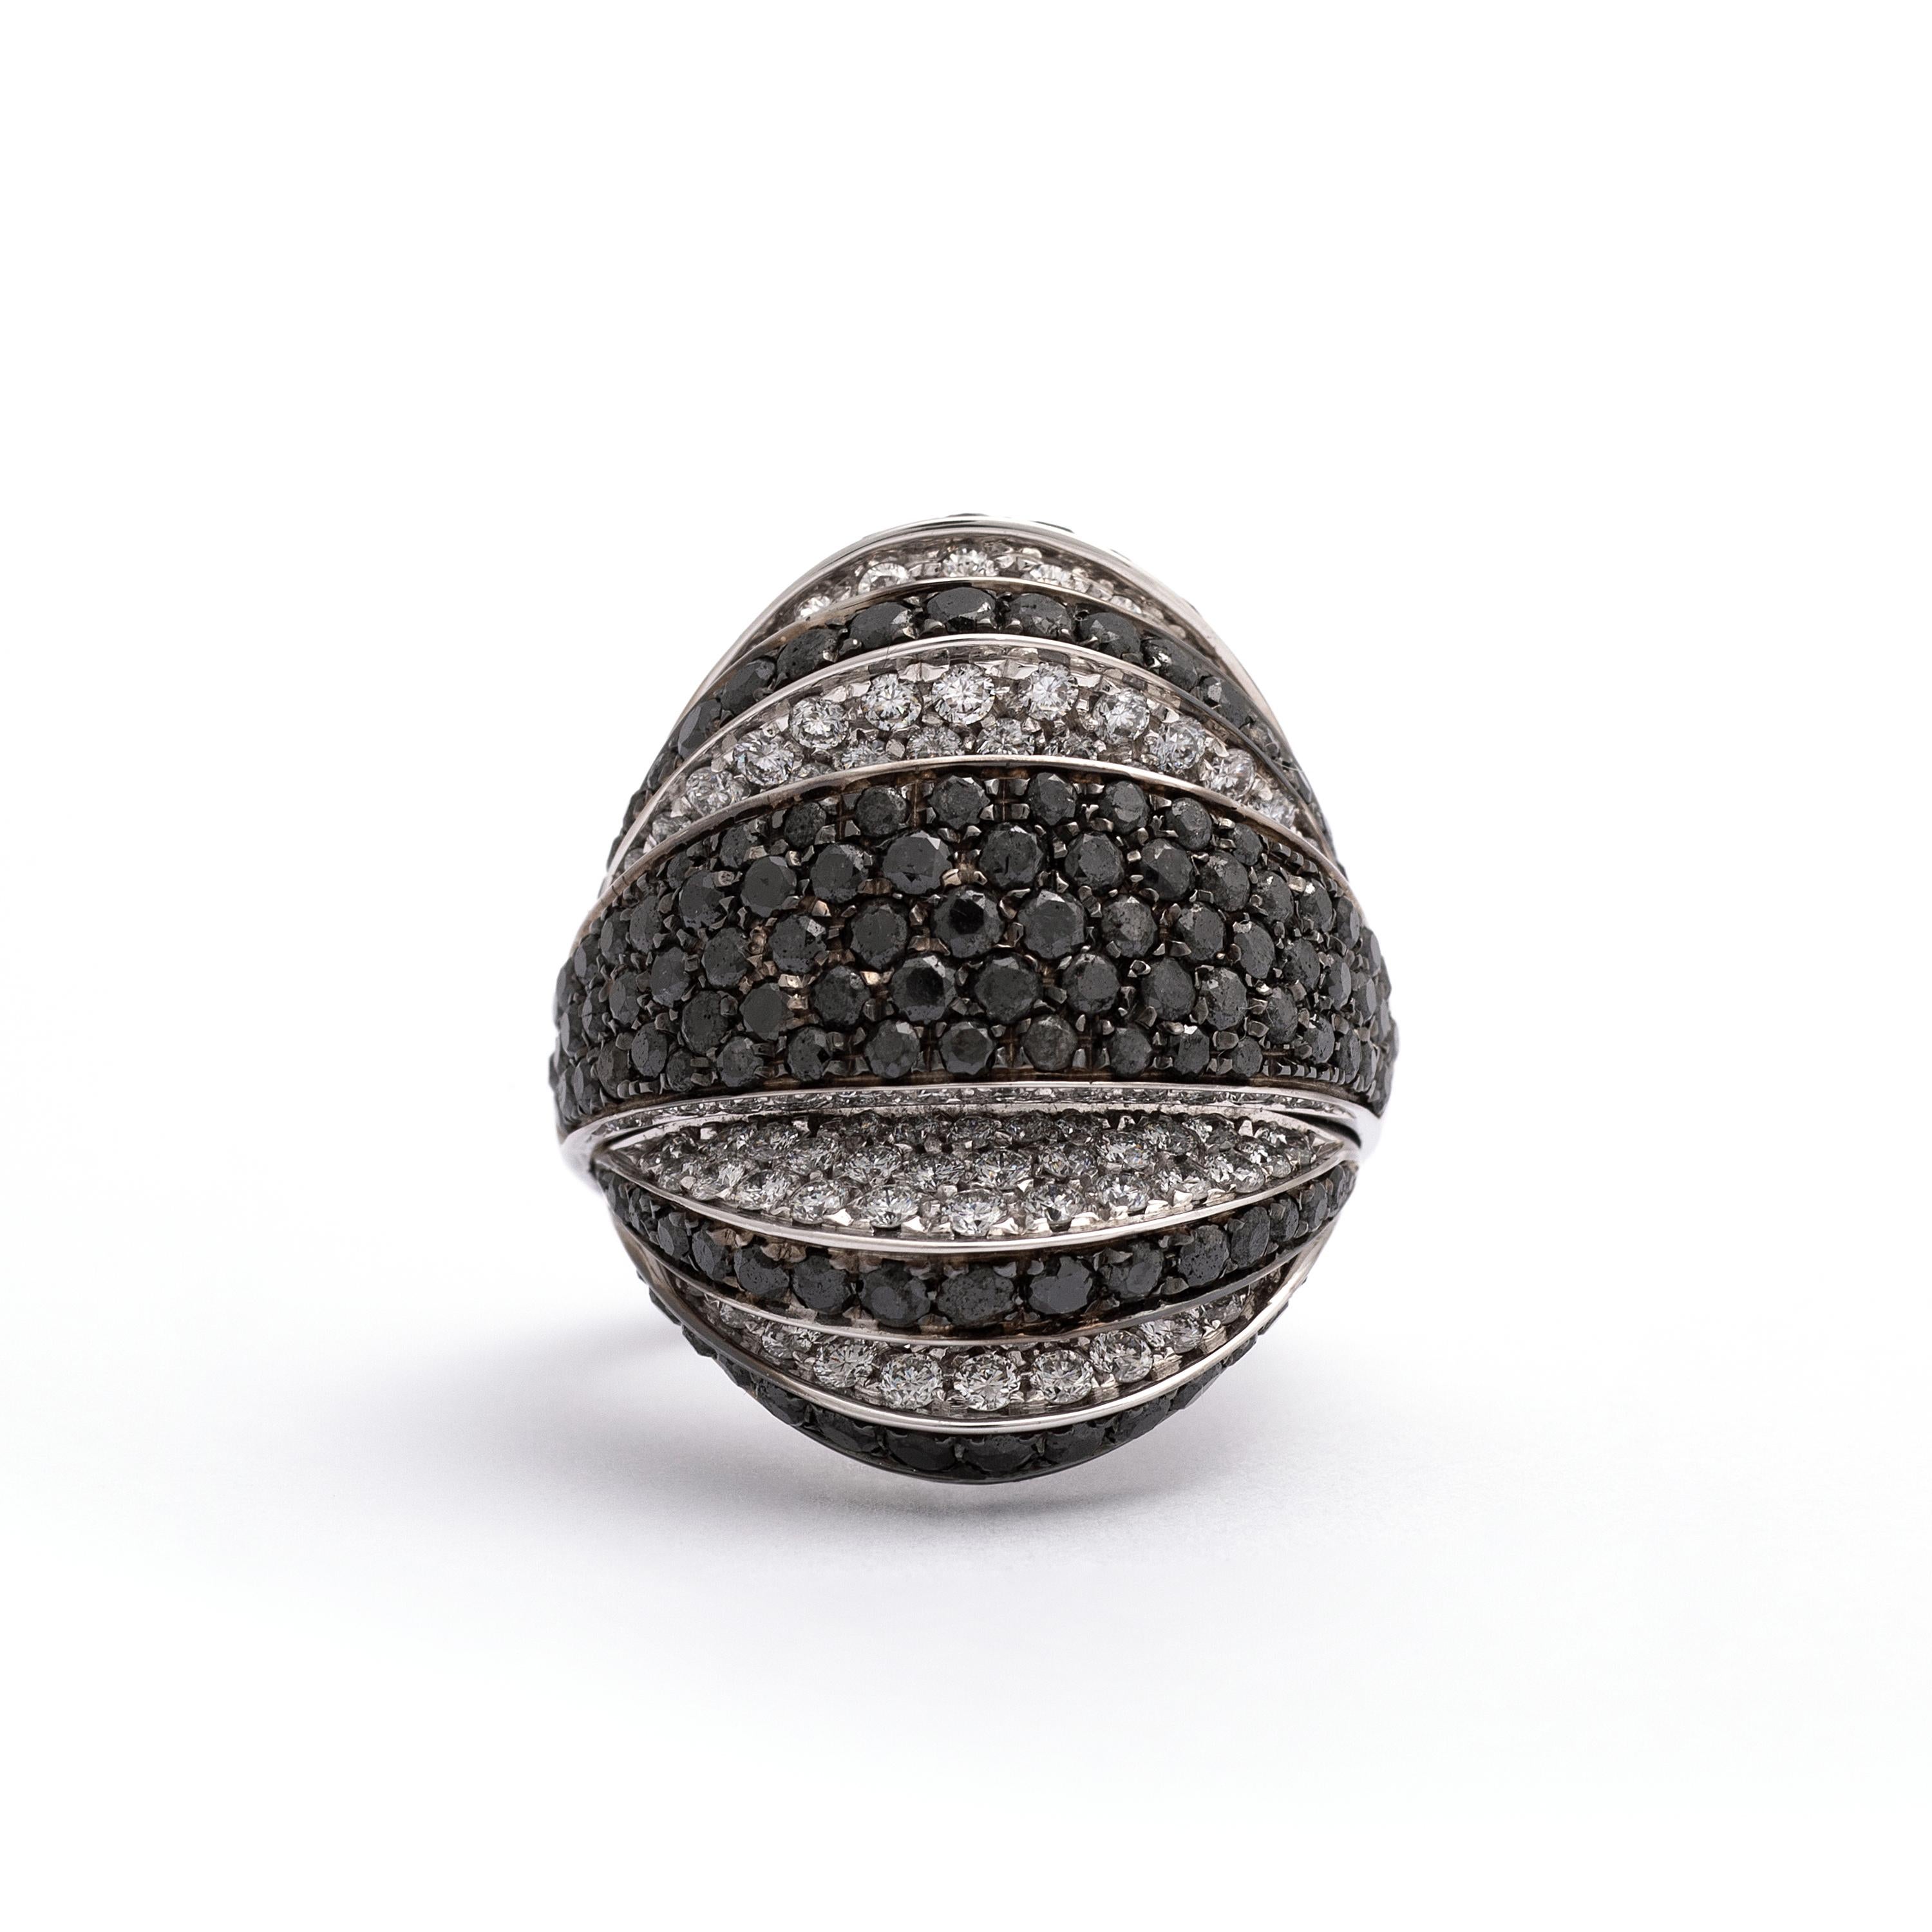 136 White Diamonds 1.92 carats and 138 Black Diamonds 3.90 carats on white gold Ring.
Contemporary.